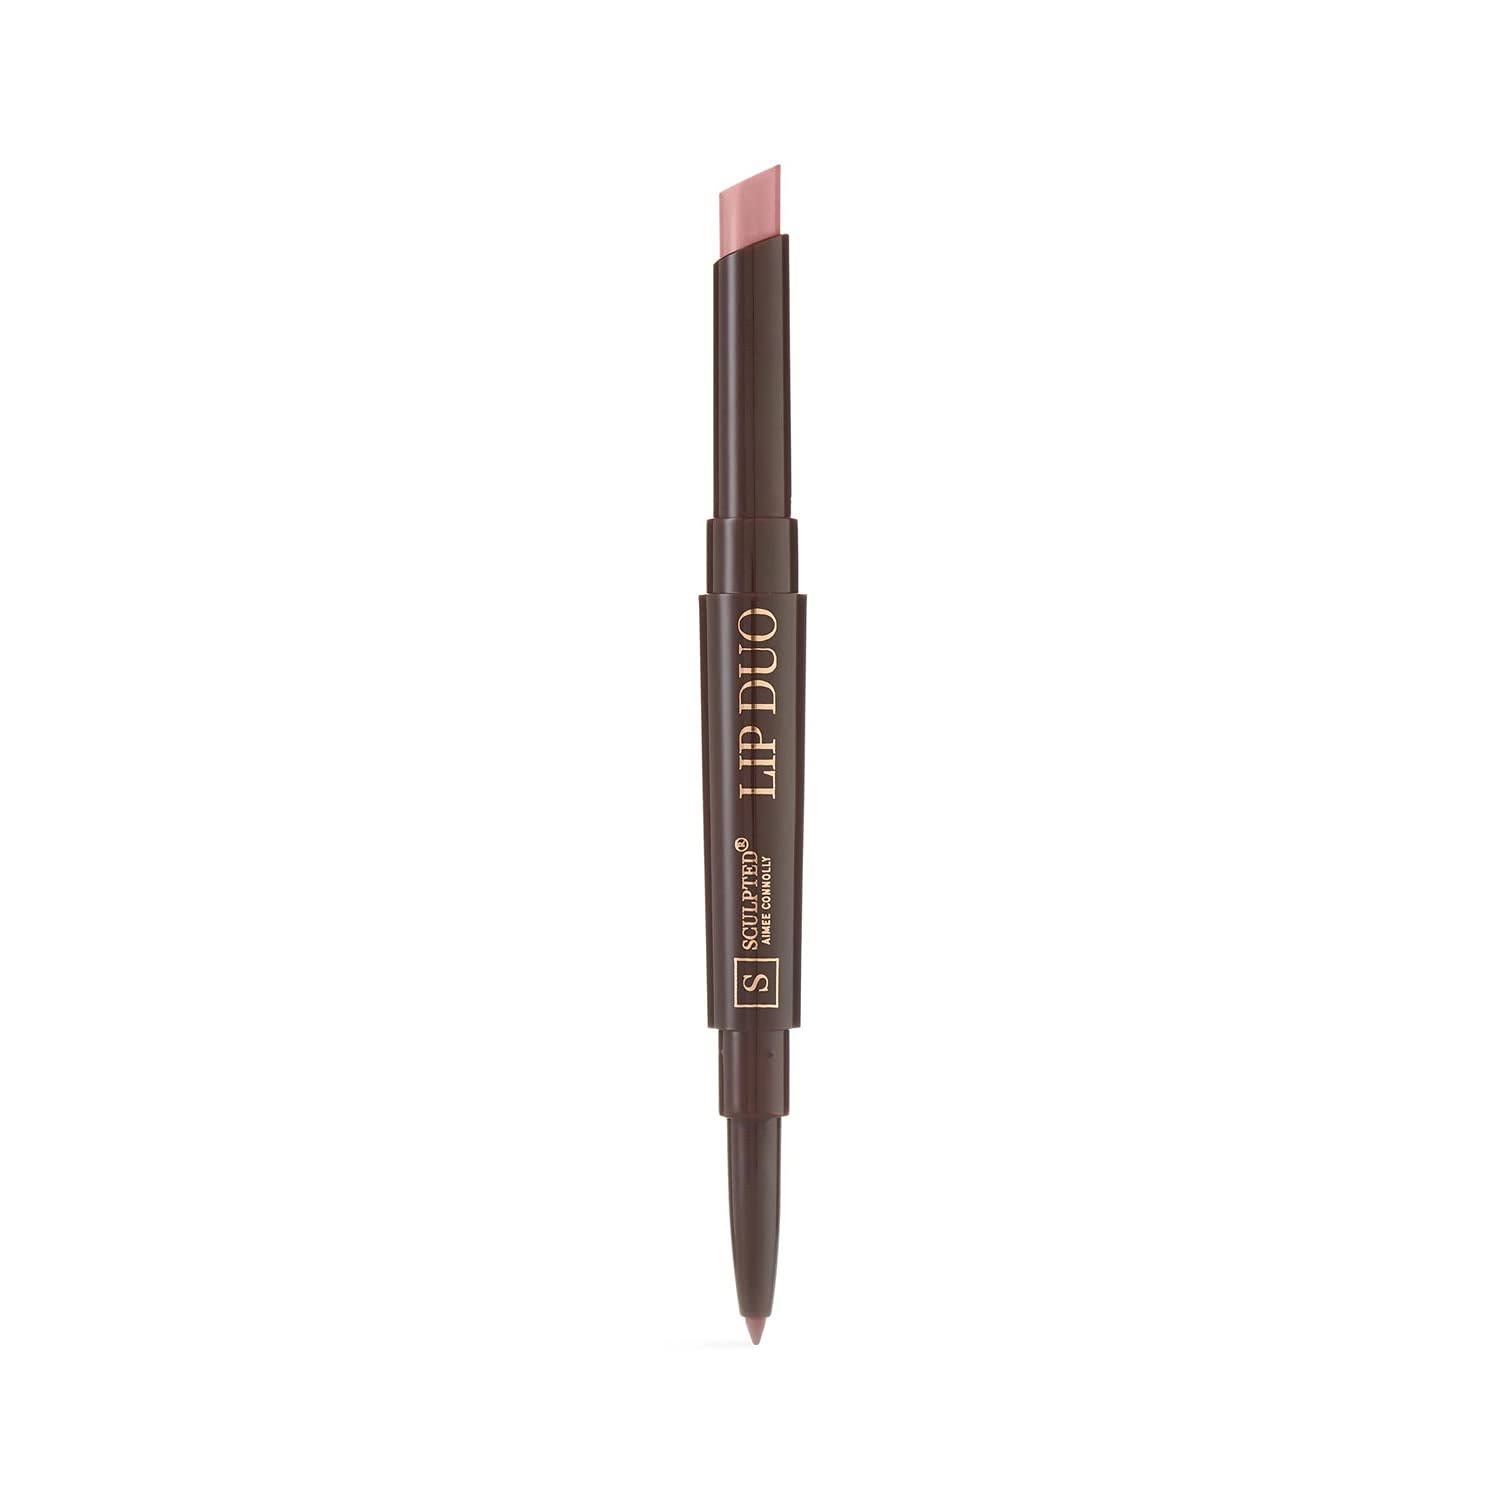 Sculpted Undressed Creamy Lip Duo Liner and Lipstick 4.5g Naked